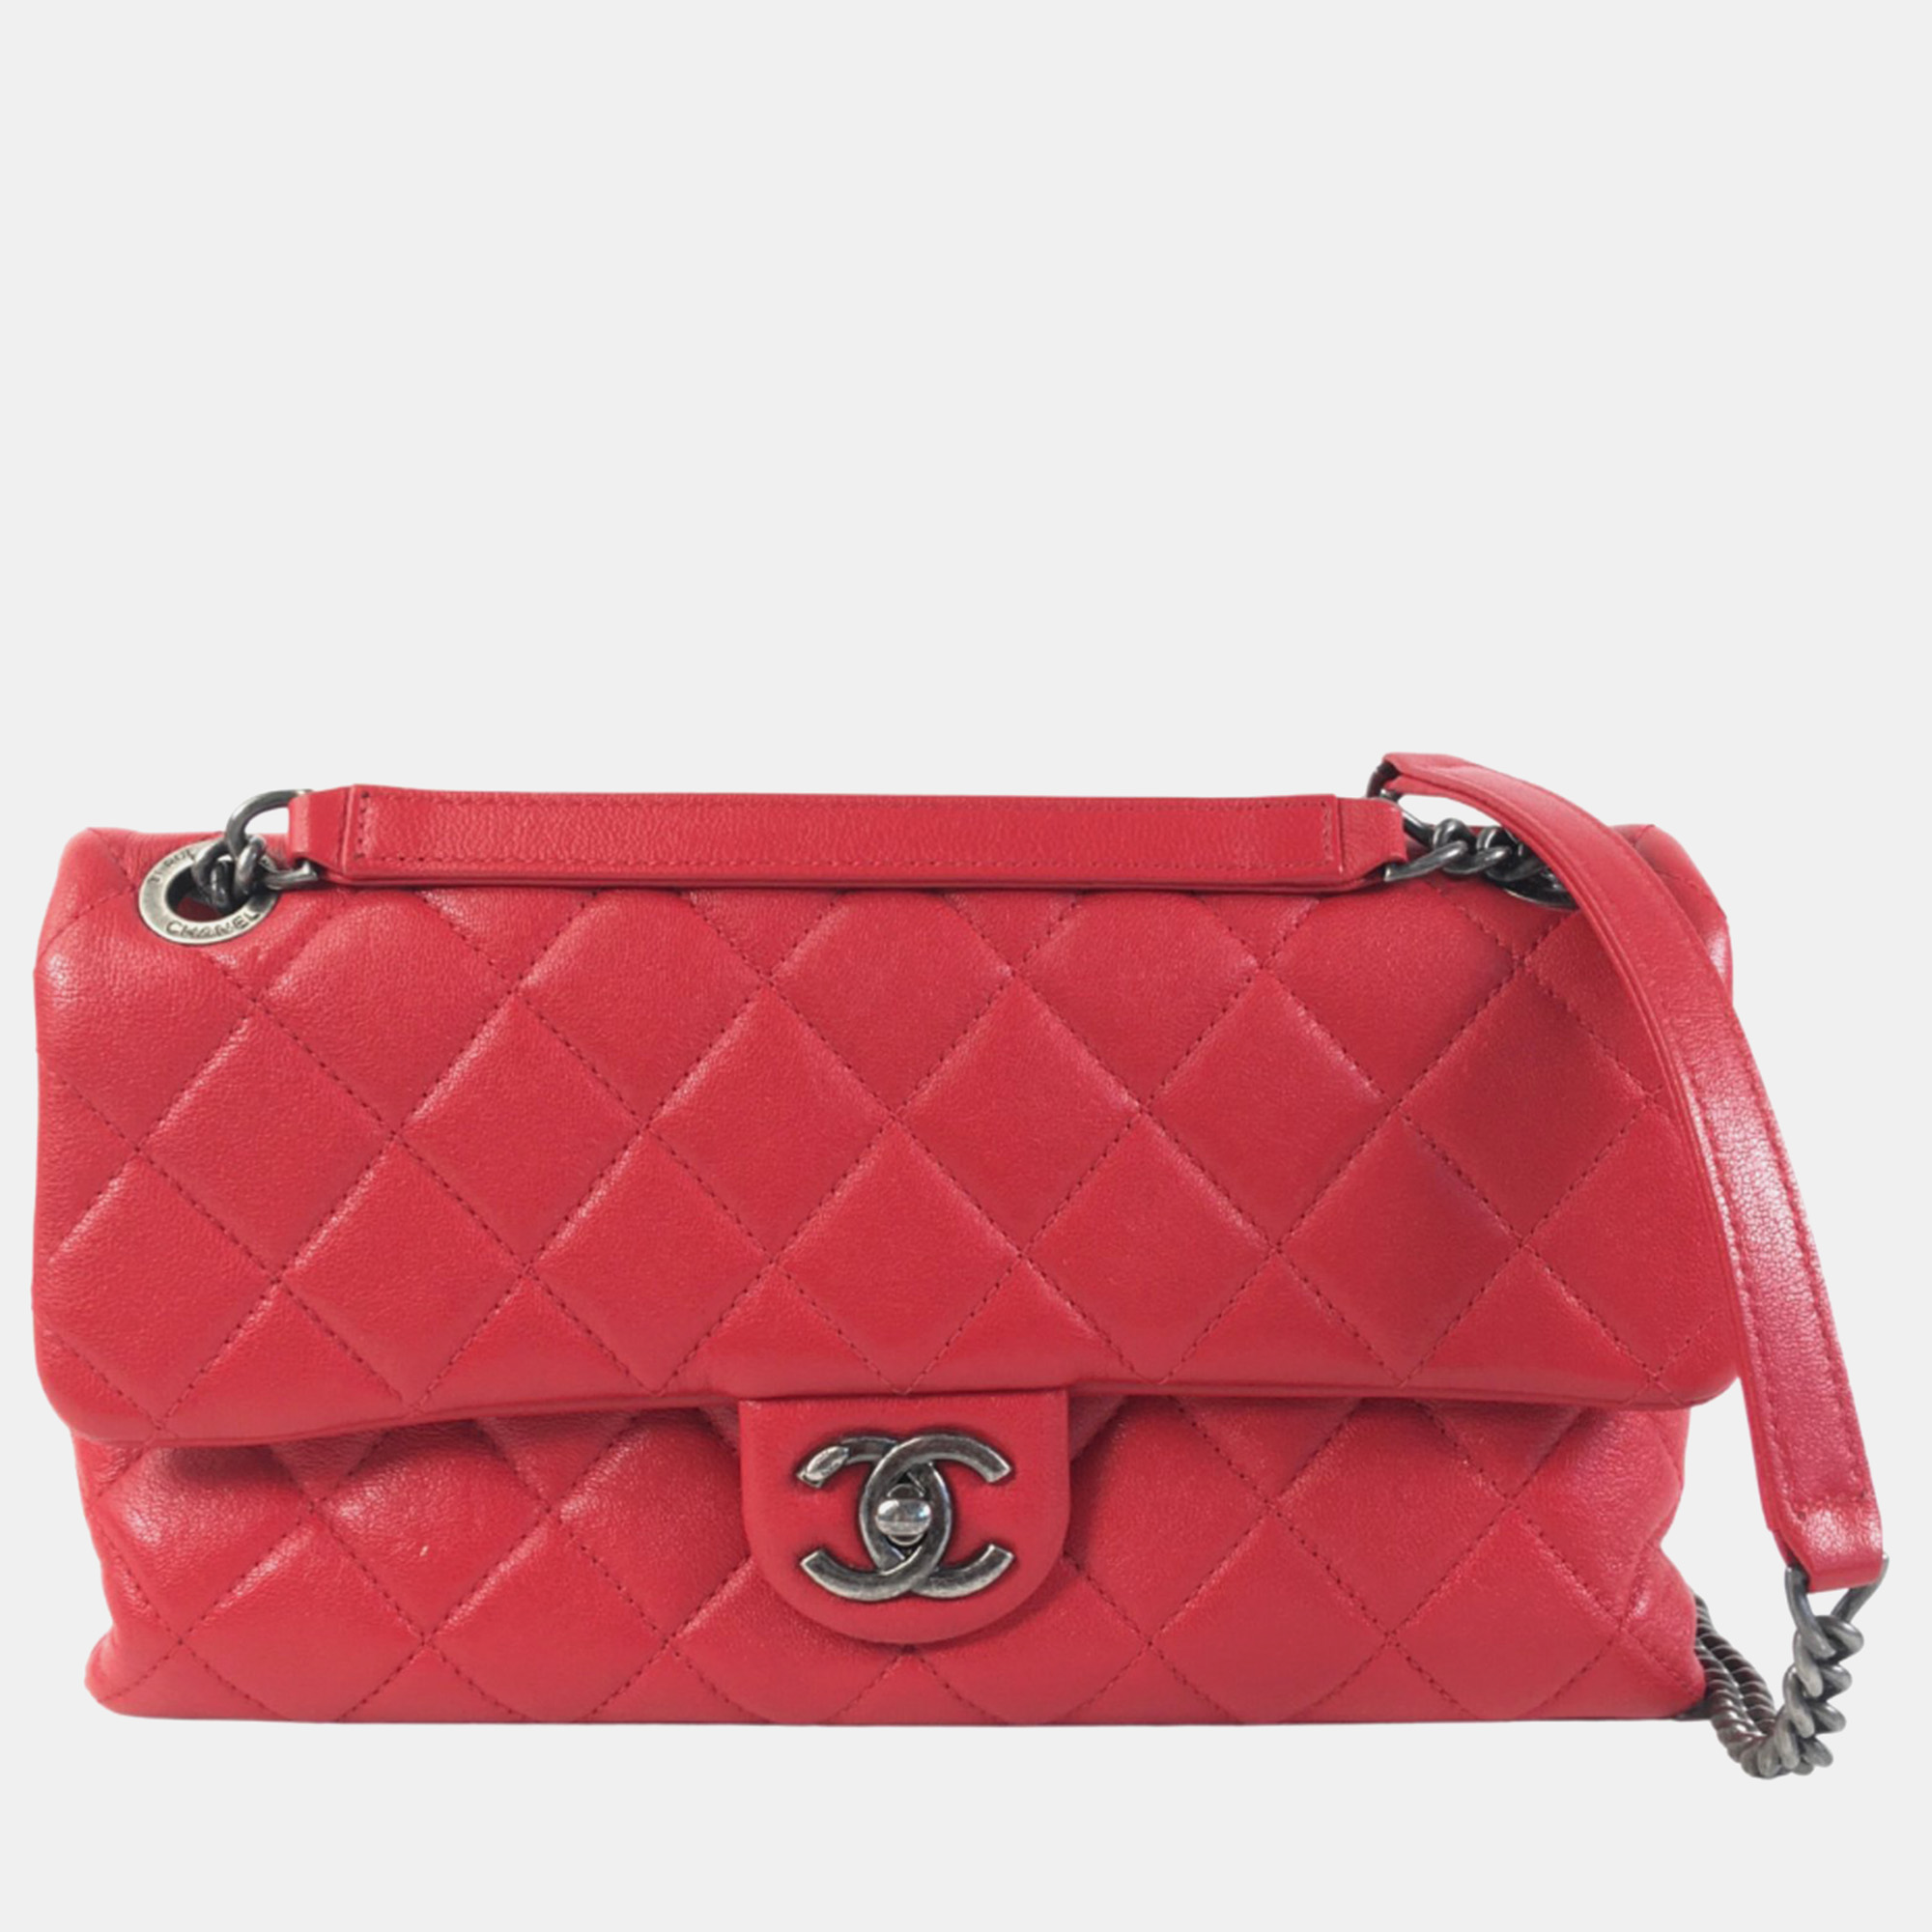 Chanel red cc quilted lambskin single flap bag